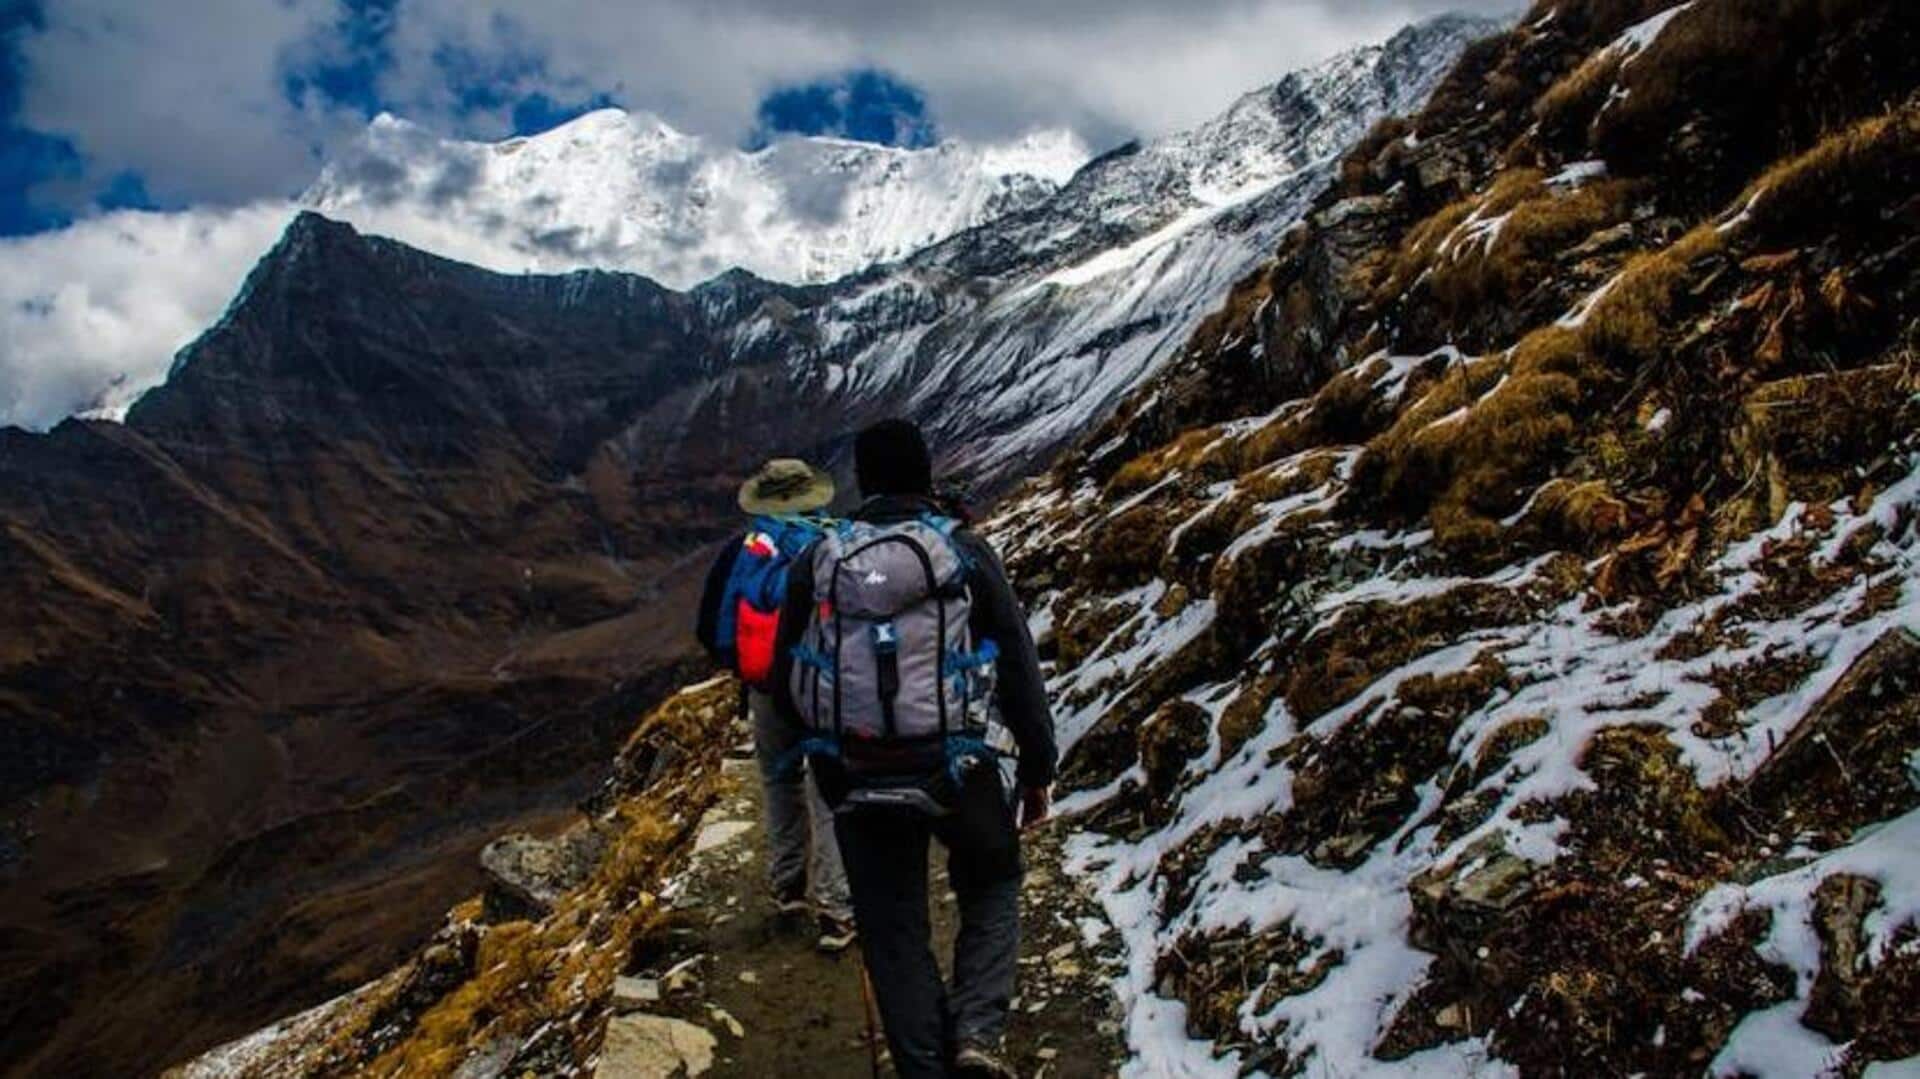 Trekking the Andes in Peru: Tips for a safe experience